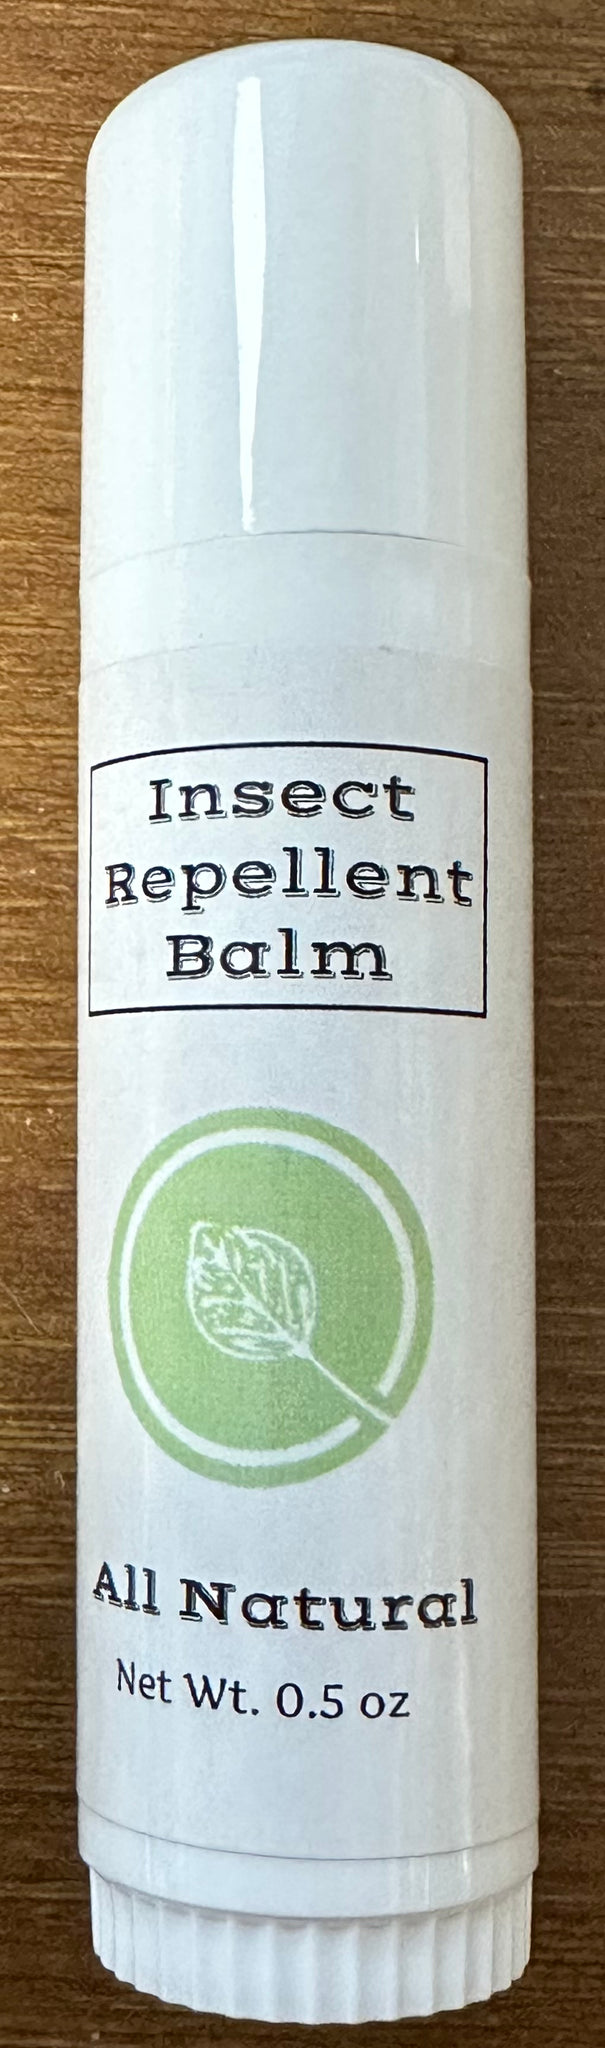 Insect repellent Balm